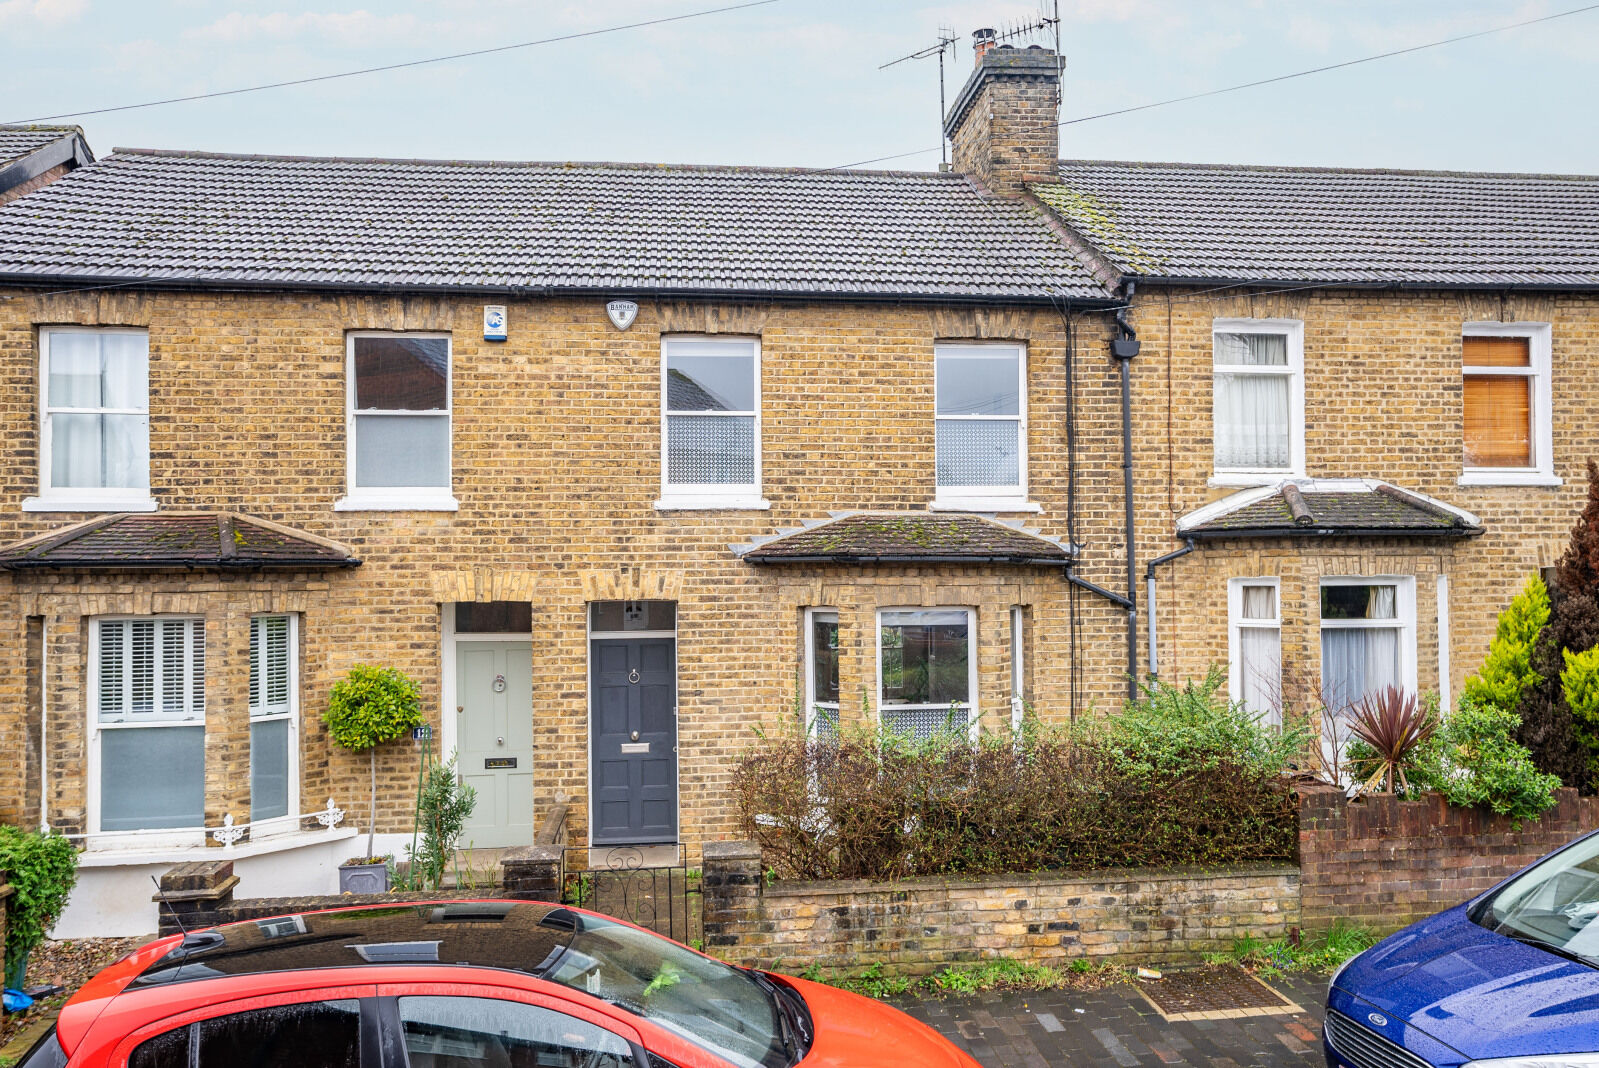 3 bedroom mid terraced house to rent, Available now Oswald Road, St. Albans, AL1, main image